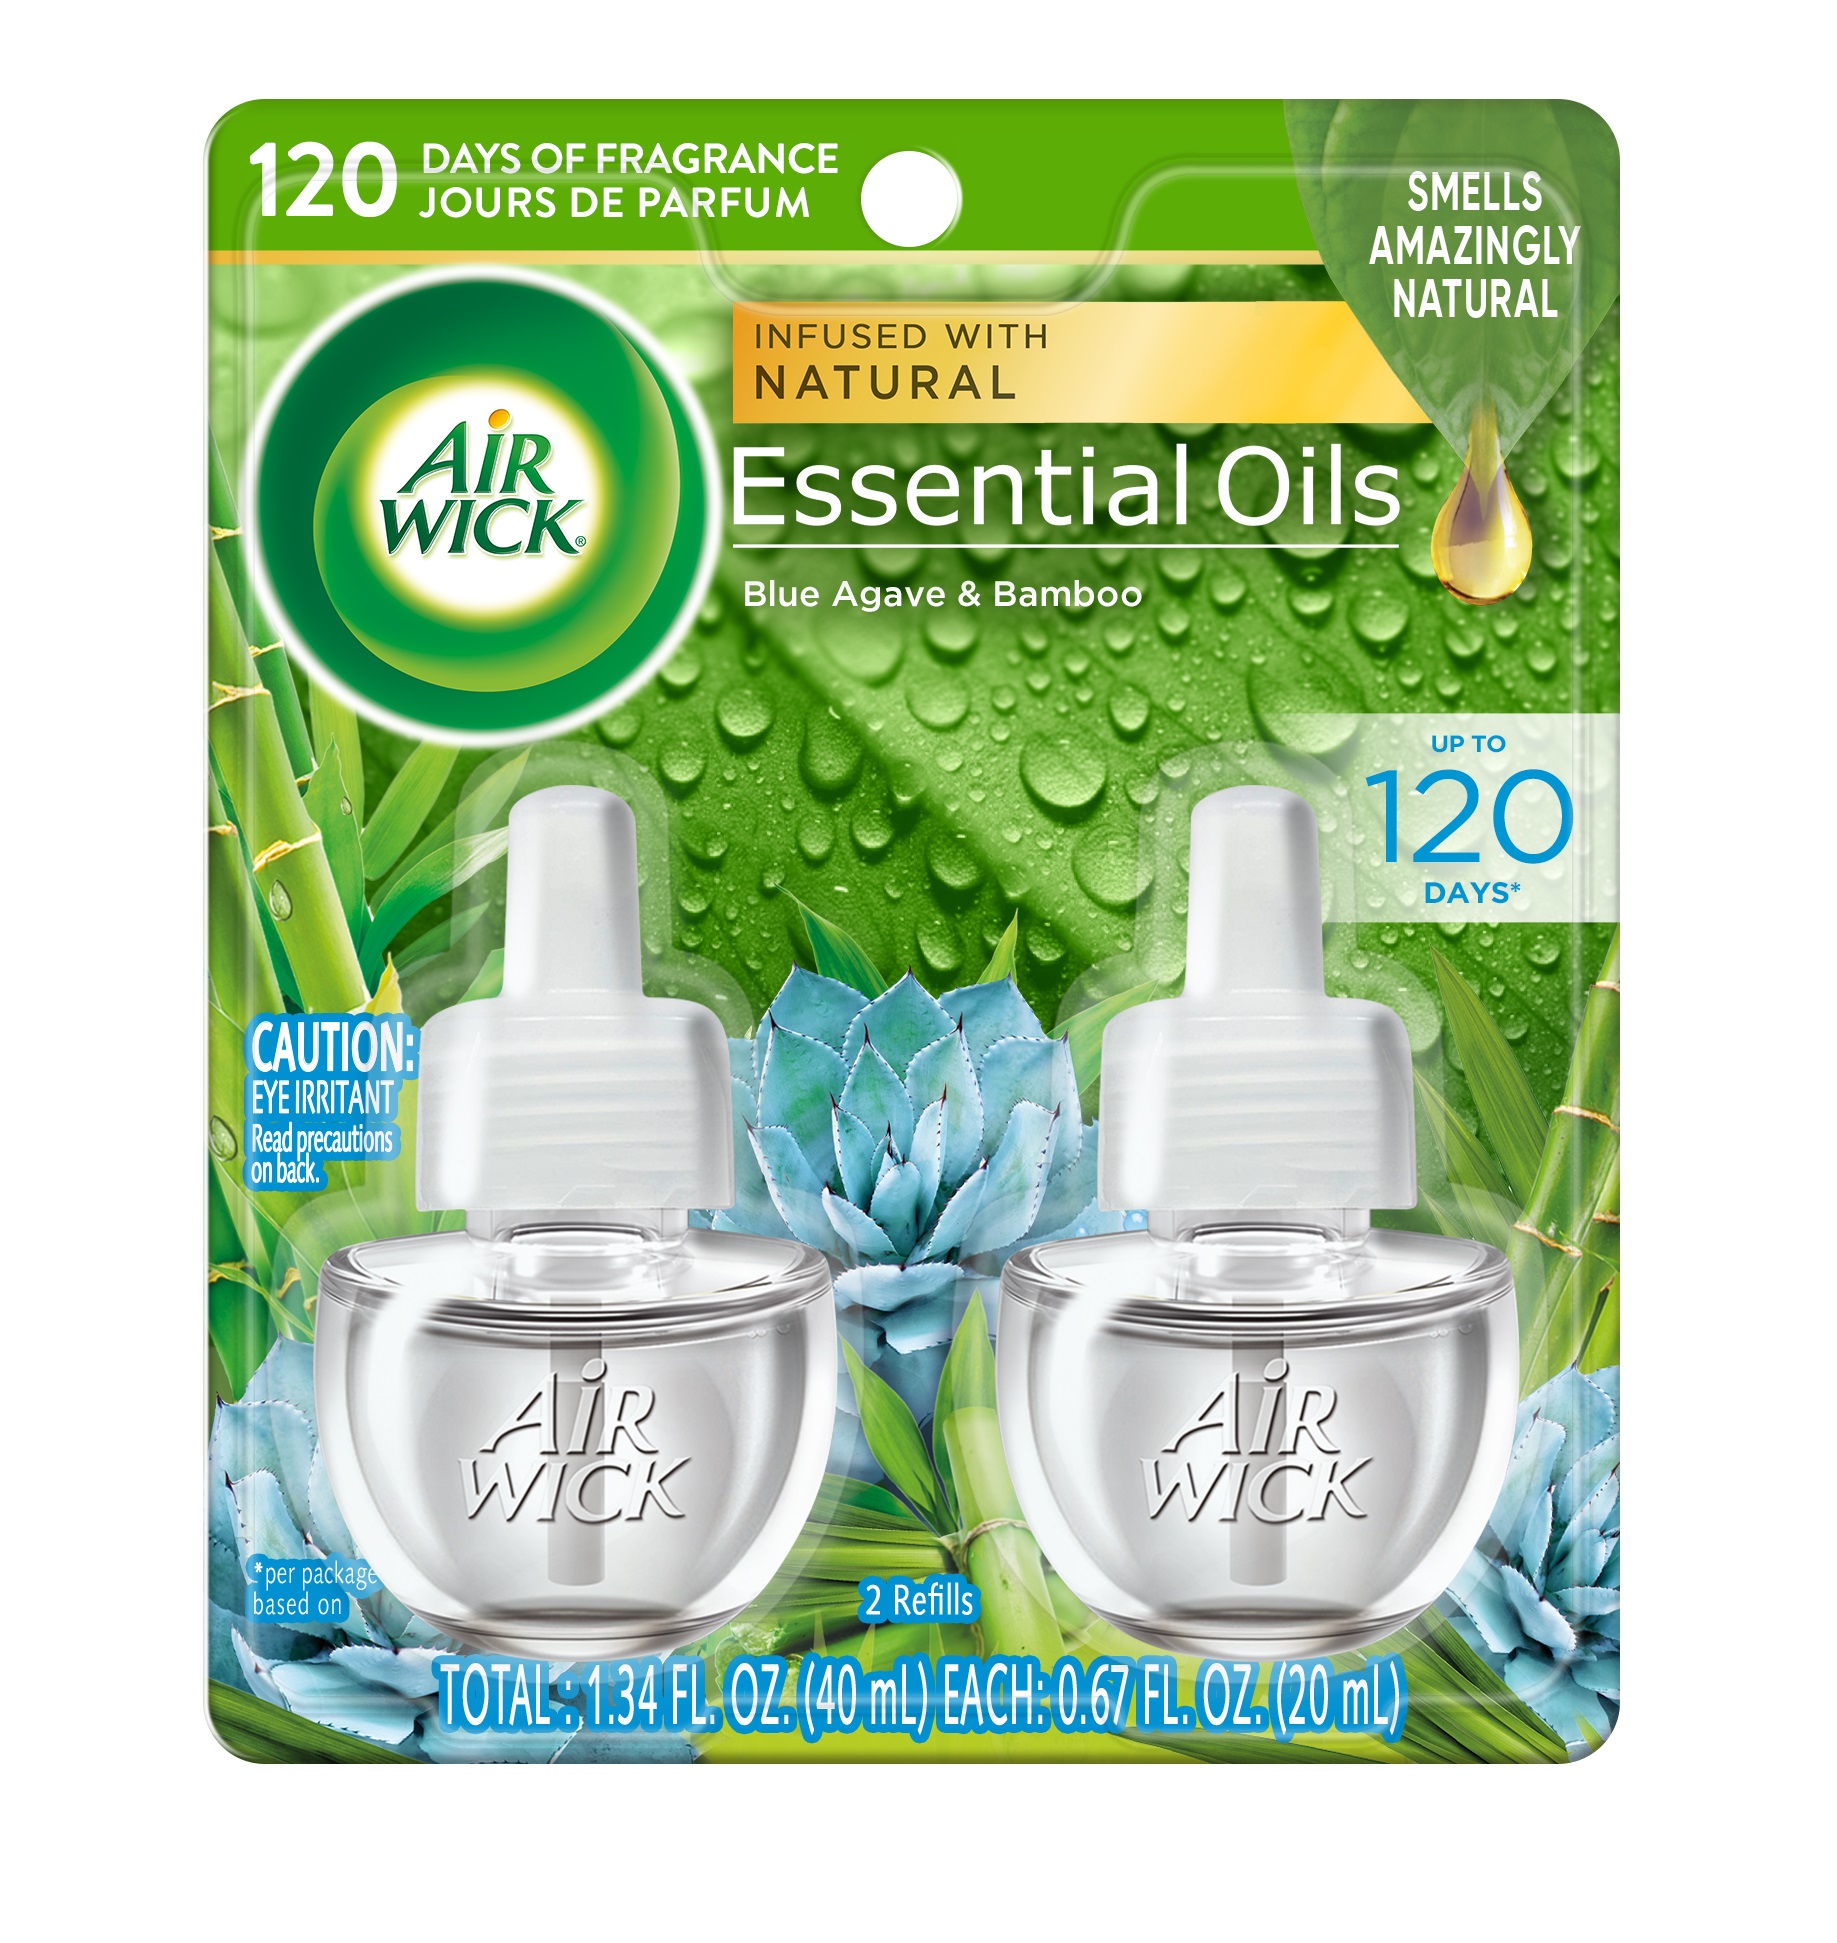 Air Wick Plug in Scented Oil, Peach & Sweet Nectar